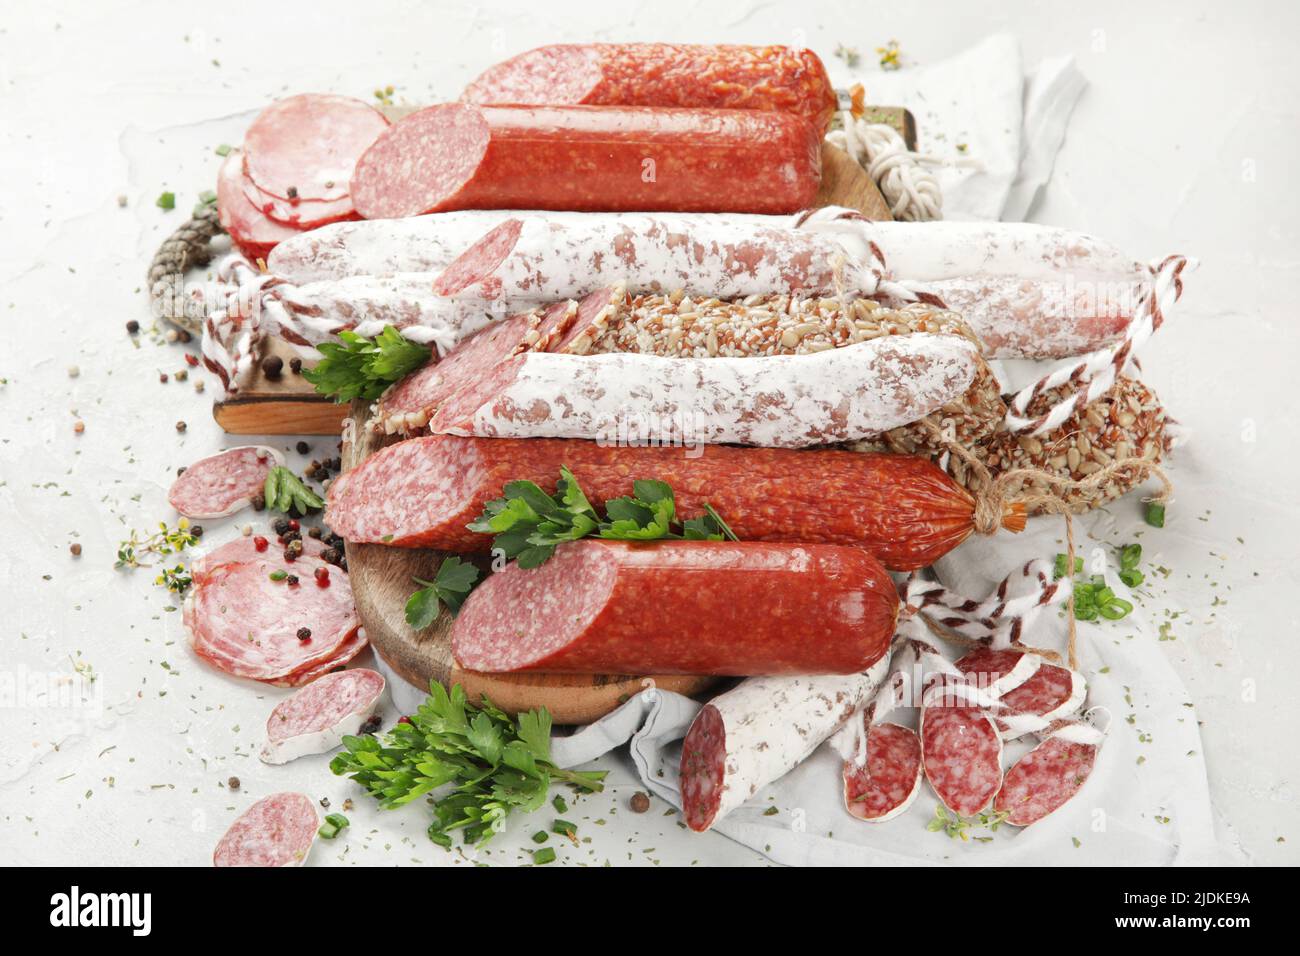 Sausages salami assortment on light background. Meat product made of finely chopped and seasoned meat. Flat lay, top view Stock Photo